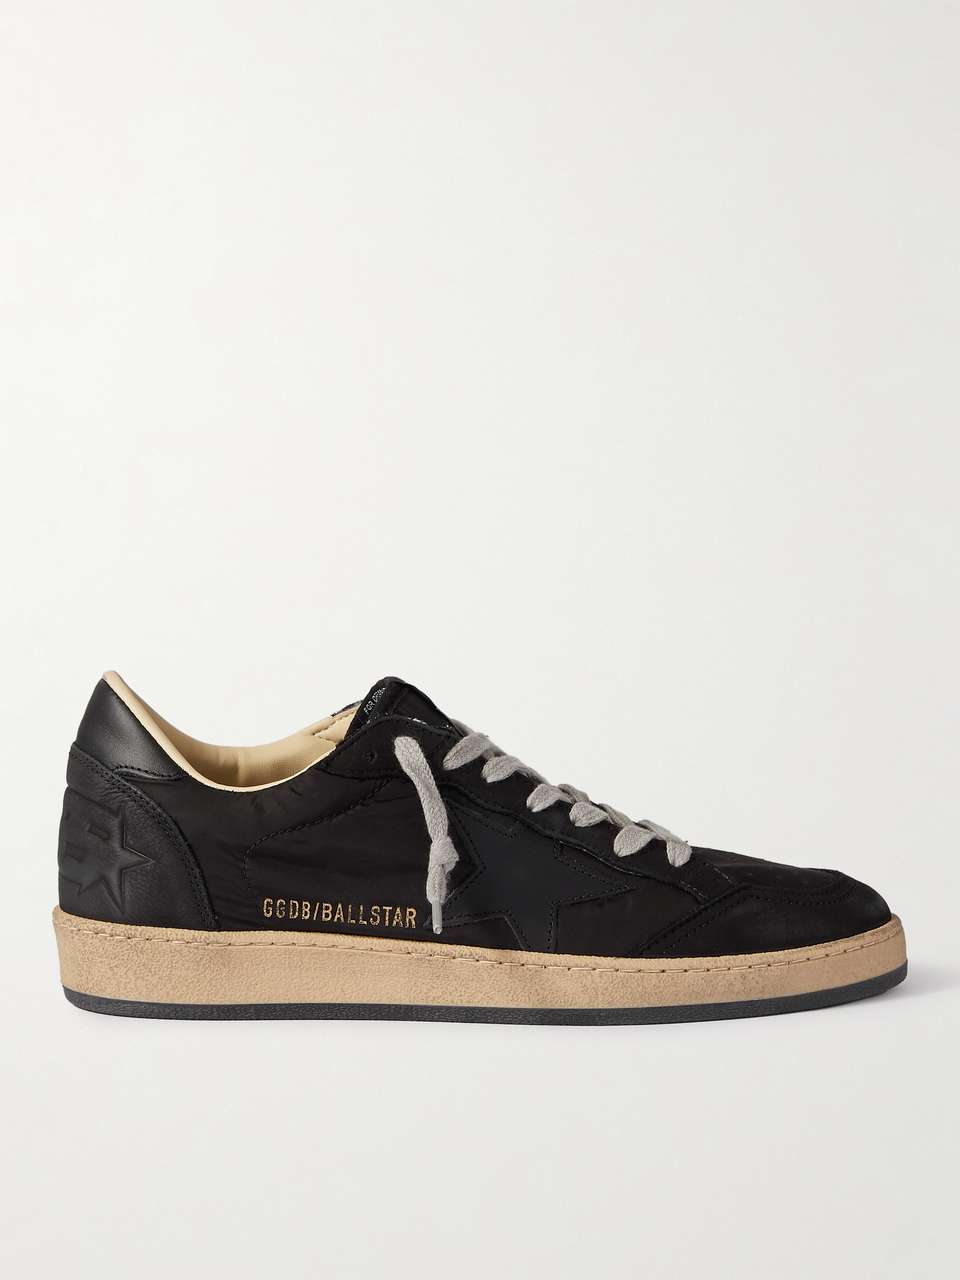 GOLDEN GOOSE Ball Star Distressed Nubuck and Leather-Trimmed Nylon ...